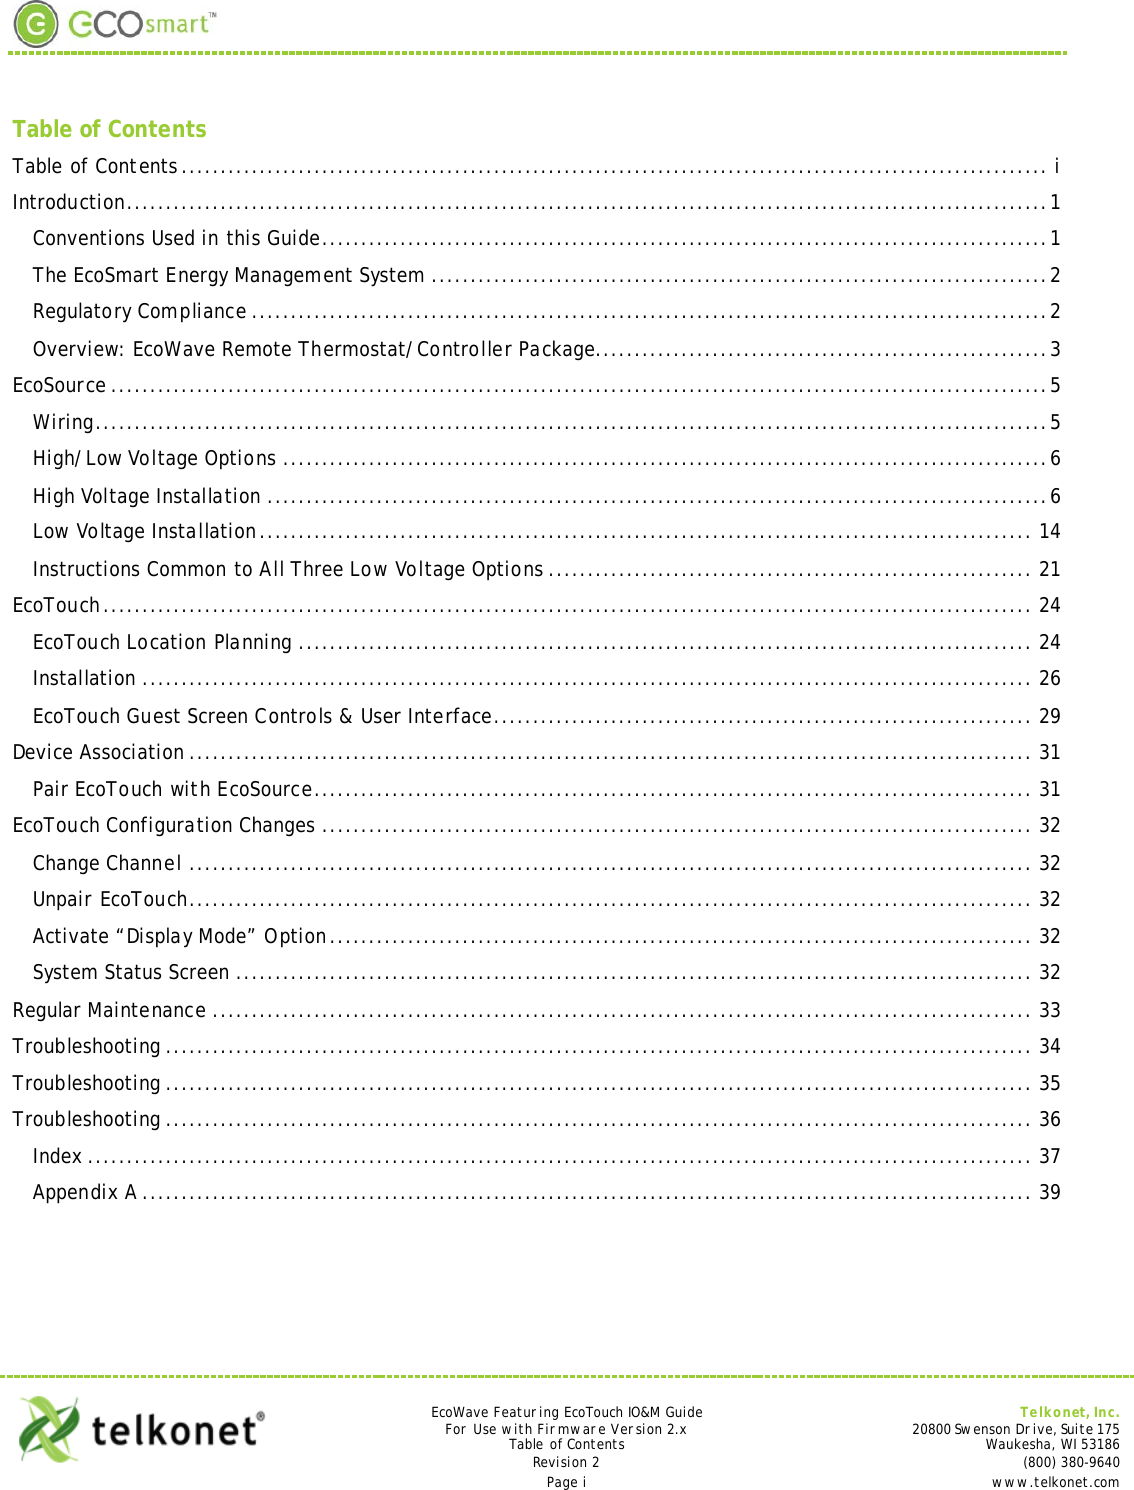   Table of Contents Table of Contents ............................................................................................................... i Introduction...................................................................................................................... 1 Conventions Used in this Guide............................................................................................. 1 The EcoSmart Energy Management System ............................................................................... 2 Regulatory Compliance ...................................................................................................... 2 Overview: EcoWave Remote Thermostat/Controller Package.......................................................... 3 EcoSource ........................................................................................................................ 5 Wiring .......................................................................................................................... 5 High/Low Voltage Options .................................................................................................. 6 High Voltage Installation .................................................................................................... 6 Low Voltage Installation ................................................................................................... 14 Instructions Common to All Three Low Voltage Options .............................................................. 21 EcoTouch ....................................................................................................................... 24 EcoTouch Location Planning .............................................................................................. 24 Installation .................................................................................................................. 26 EcoTouch Guest Screen Controls &amp; User Interface..................................................................... 29 Device Association ............................................................................................................ 31 Pair EcoTouch with EcoSource............................................................................................ 31 EcoTouch Configuration Changes ........................................................................................... 32 Change Channel ............................................................................................................ 32 Unpair EcoTouch............................................................................................................ 32 Activate “Display Mode” Option .......................................................................................... 32 System Status Screen ...................................................................................................... 32 Regular Maintenance ......................................................................................................... 33 Troubleshooting ............................................................................................................... 34 Troubleshooting ............................................................................................................... 35 Troubleshooting ............................................................................................................... 36 Index ......................................................................................................................... 37 Appendix A .................................................................................................................. 39      EcoWave Featuring EcoTouch IO&amp;M Guide Telkonet, Inc. For Use with Firmware Version 2.x 20800 Swenson Drive, Suite 175 Table of Contents Waukesha, WI 53186 Revision 2      (800) 380-9640 Page i  www.telkonet.com  